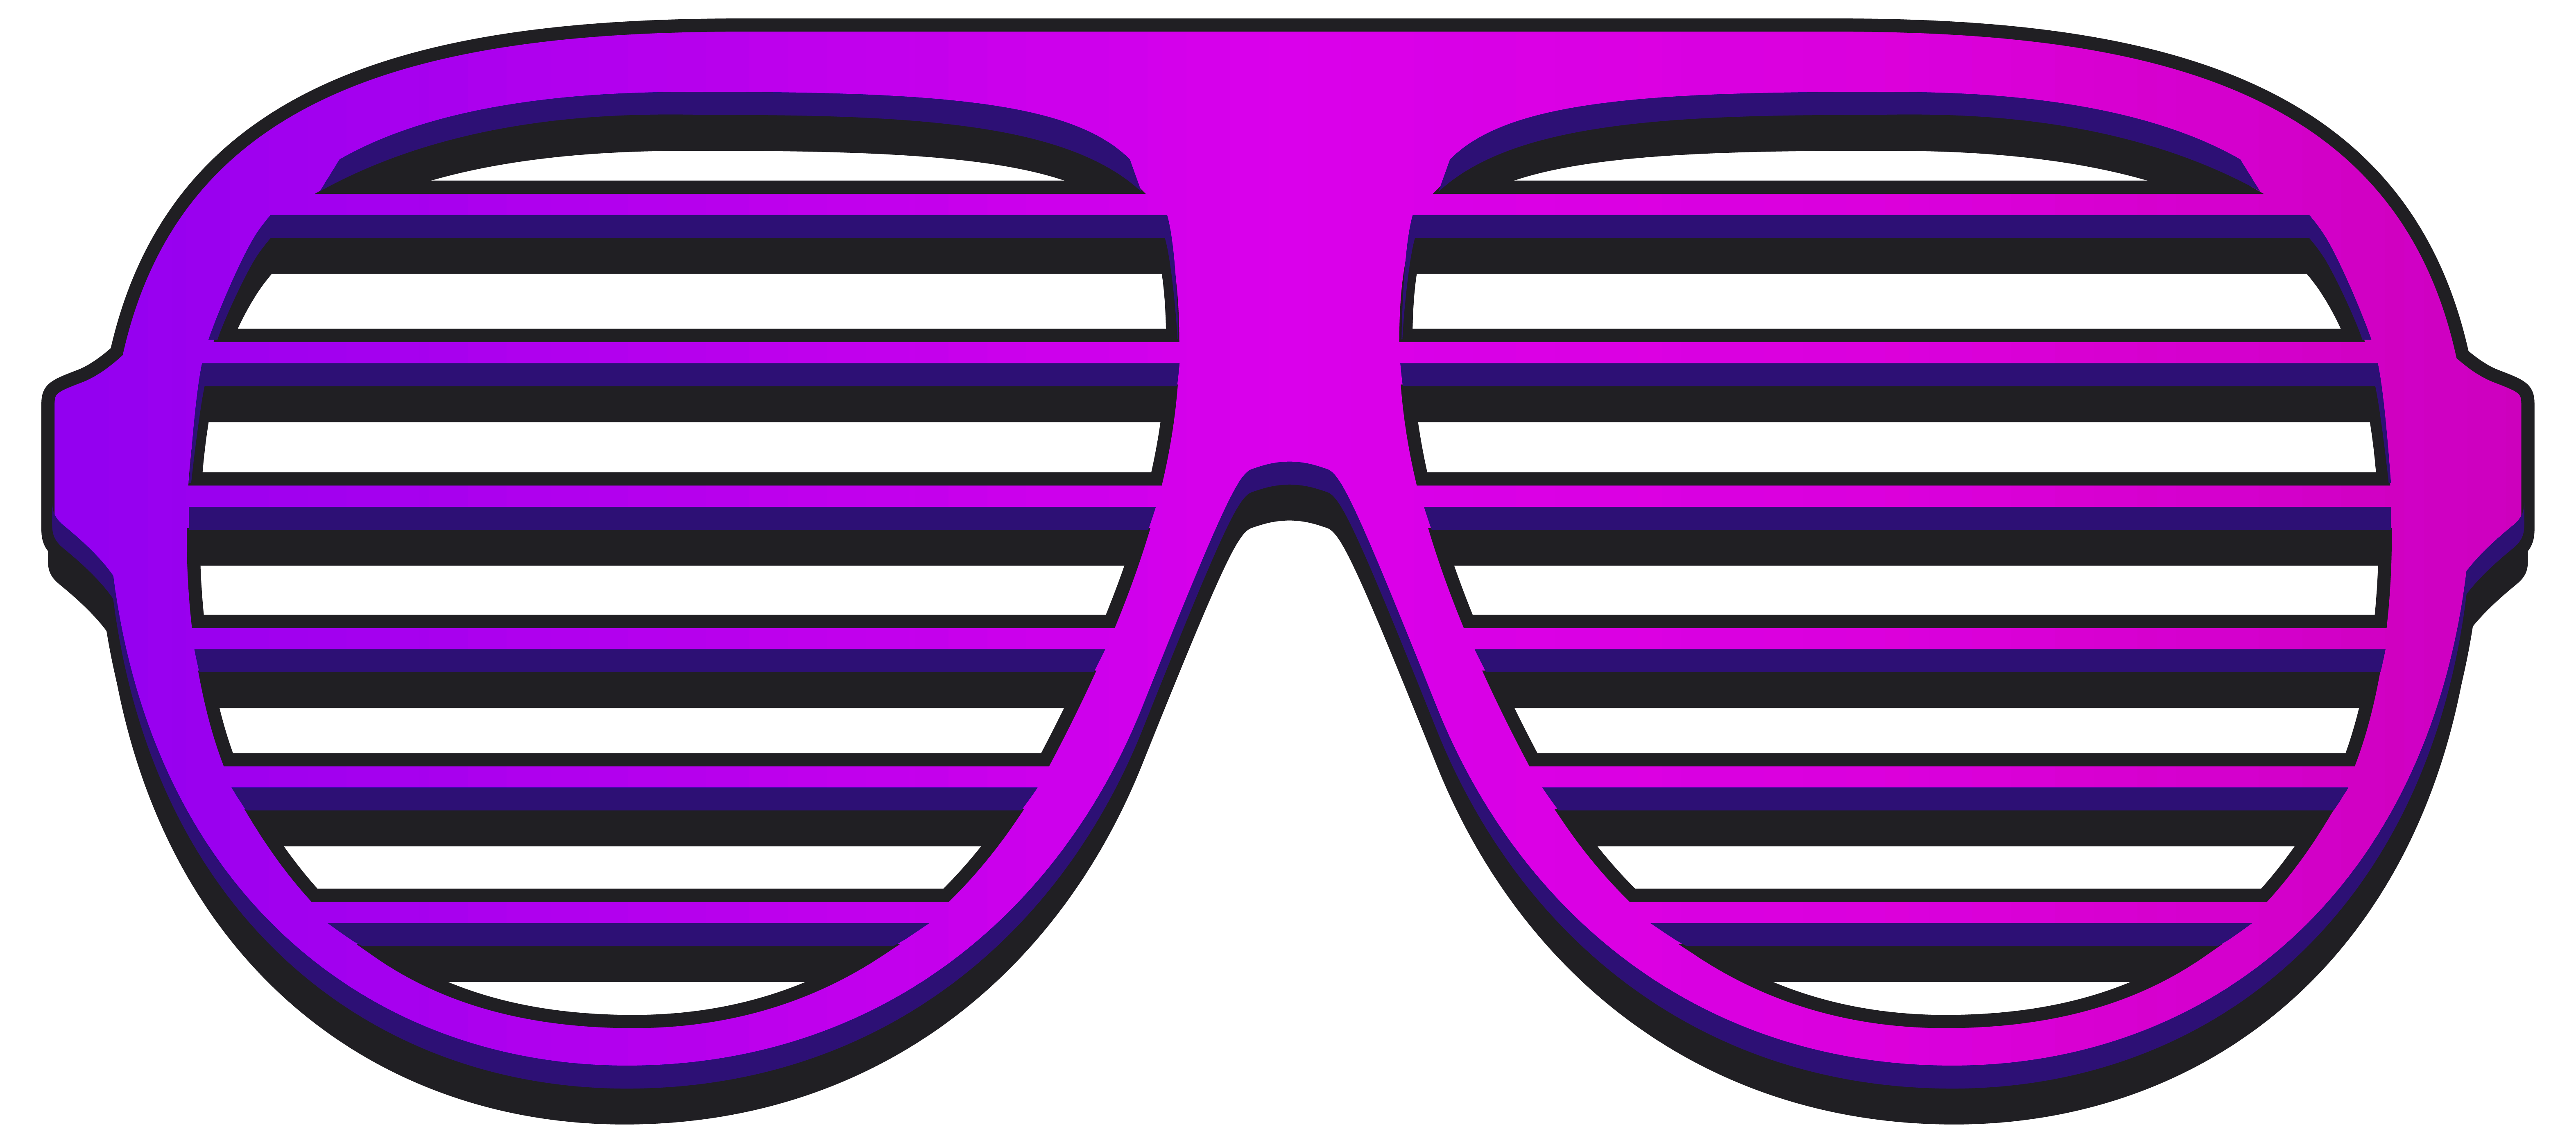 Download Shutter Sunglasses Shades Cool HD Image Free PNG